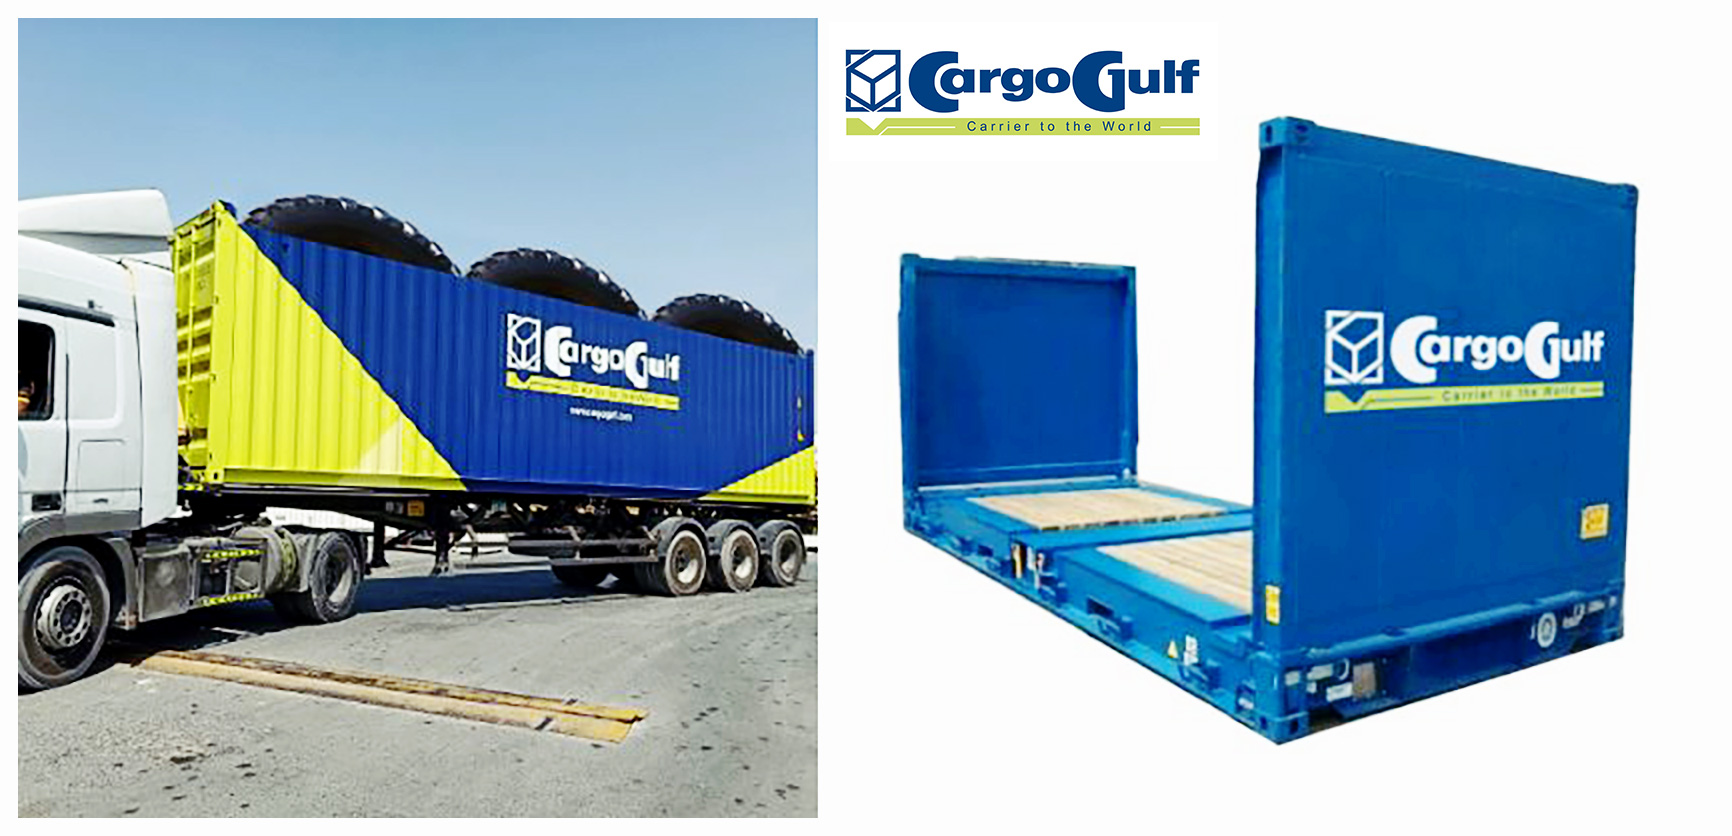 CargoGulf has Entered the Out of Gauge Cargo Market with a Fleet of Special Equipment – Flat Racks & Open Top Containers